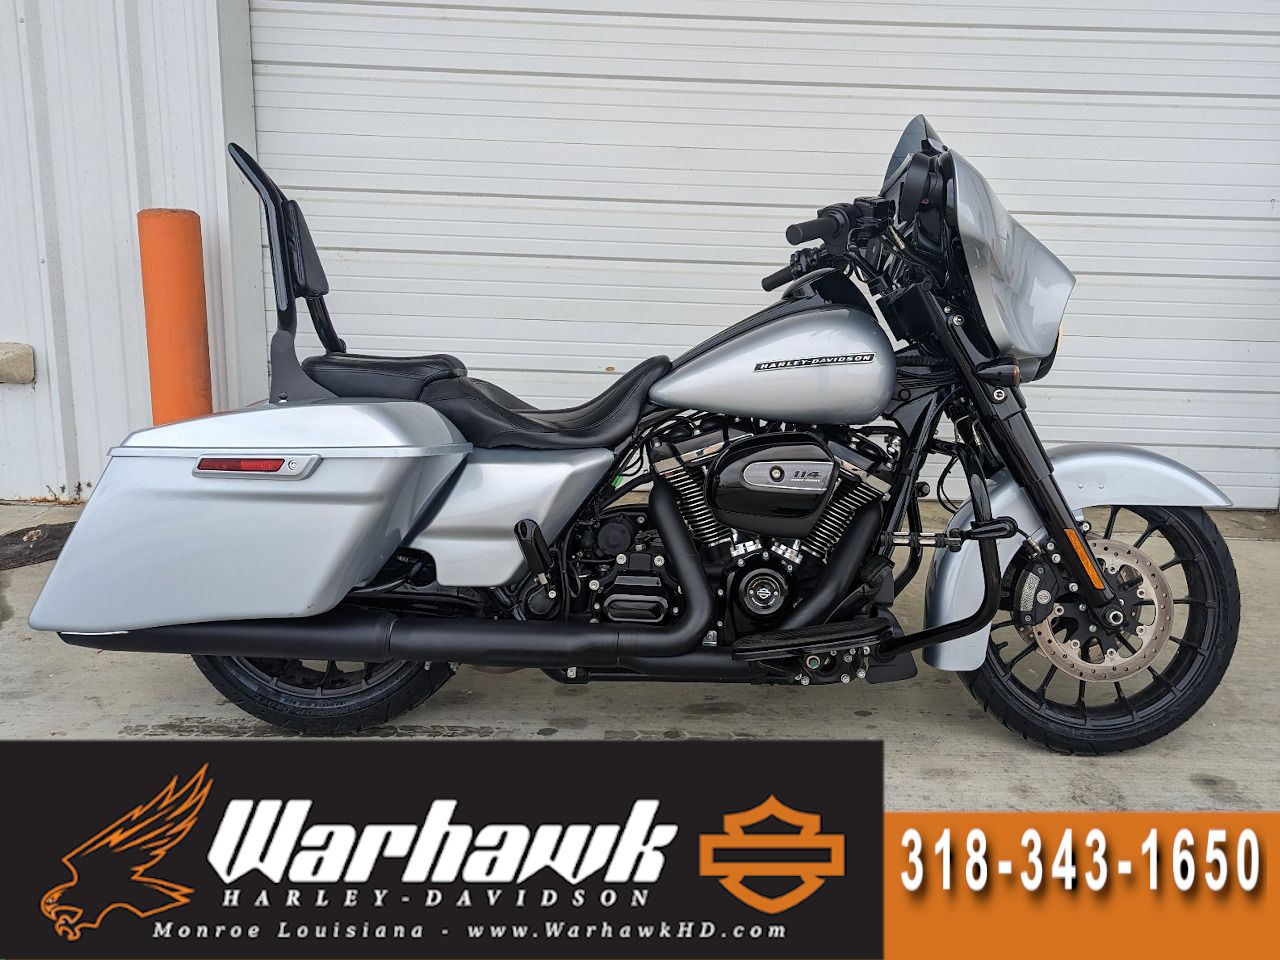 2019 harley davidson street glide special for sale near me - Photo 1